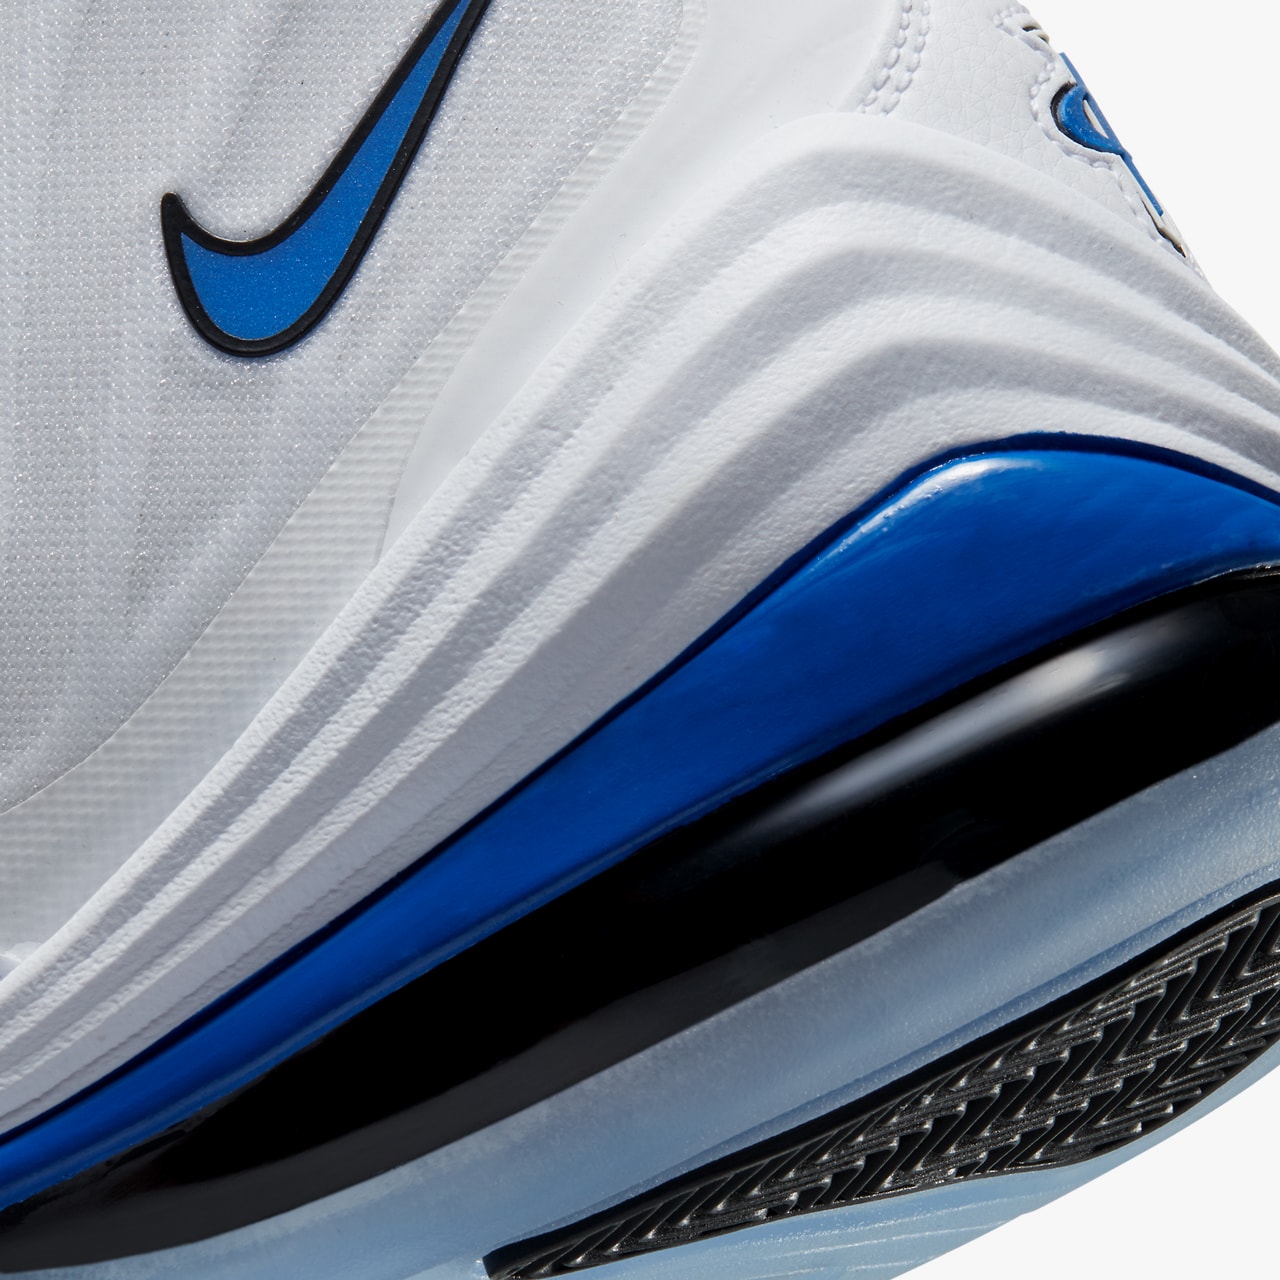 nike basketball air penny hardaway v 5 game royal white black orlando magic pinstripes CN0052 100 official release date info photos price store list buying guide